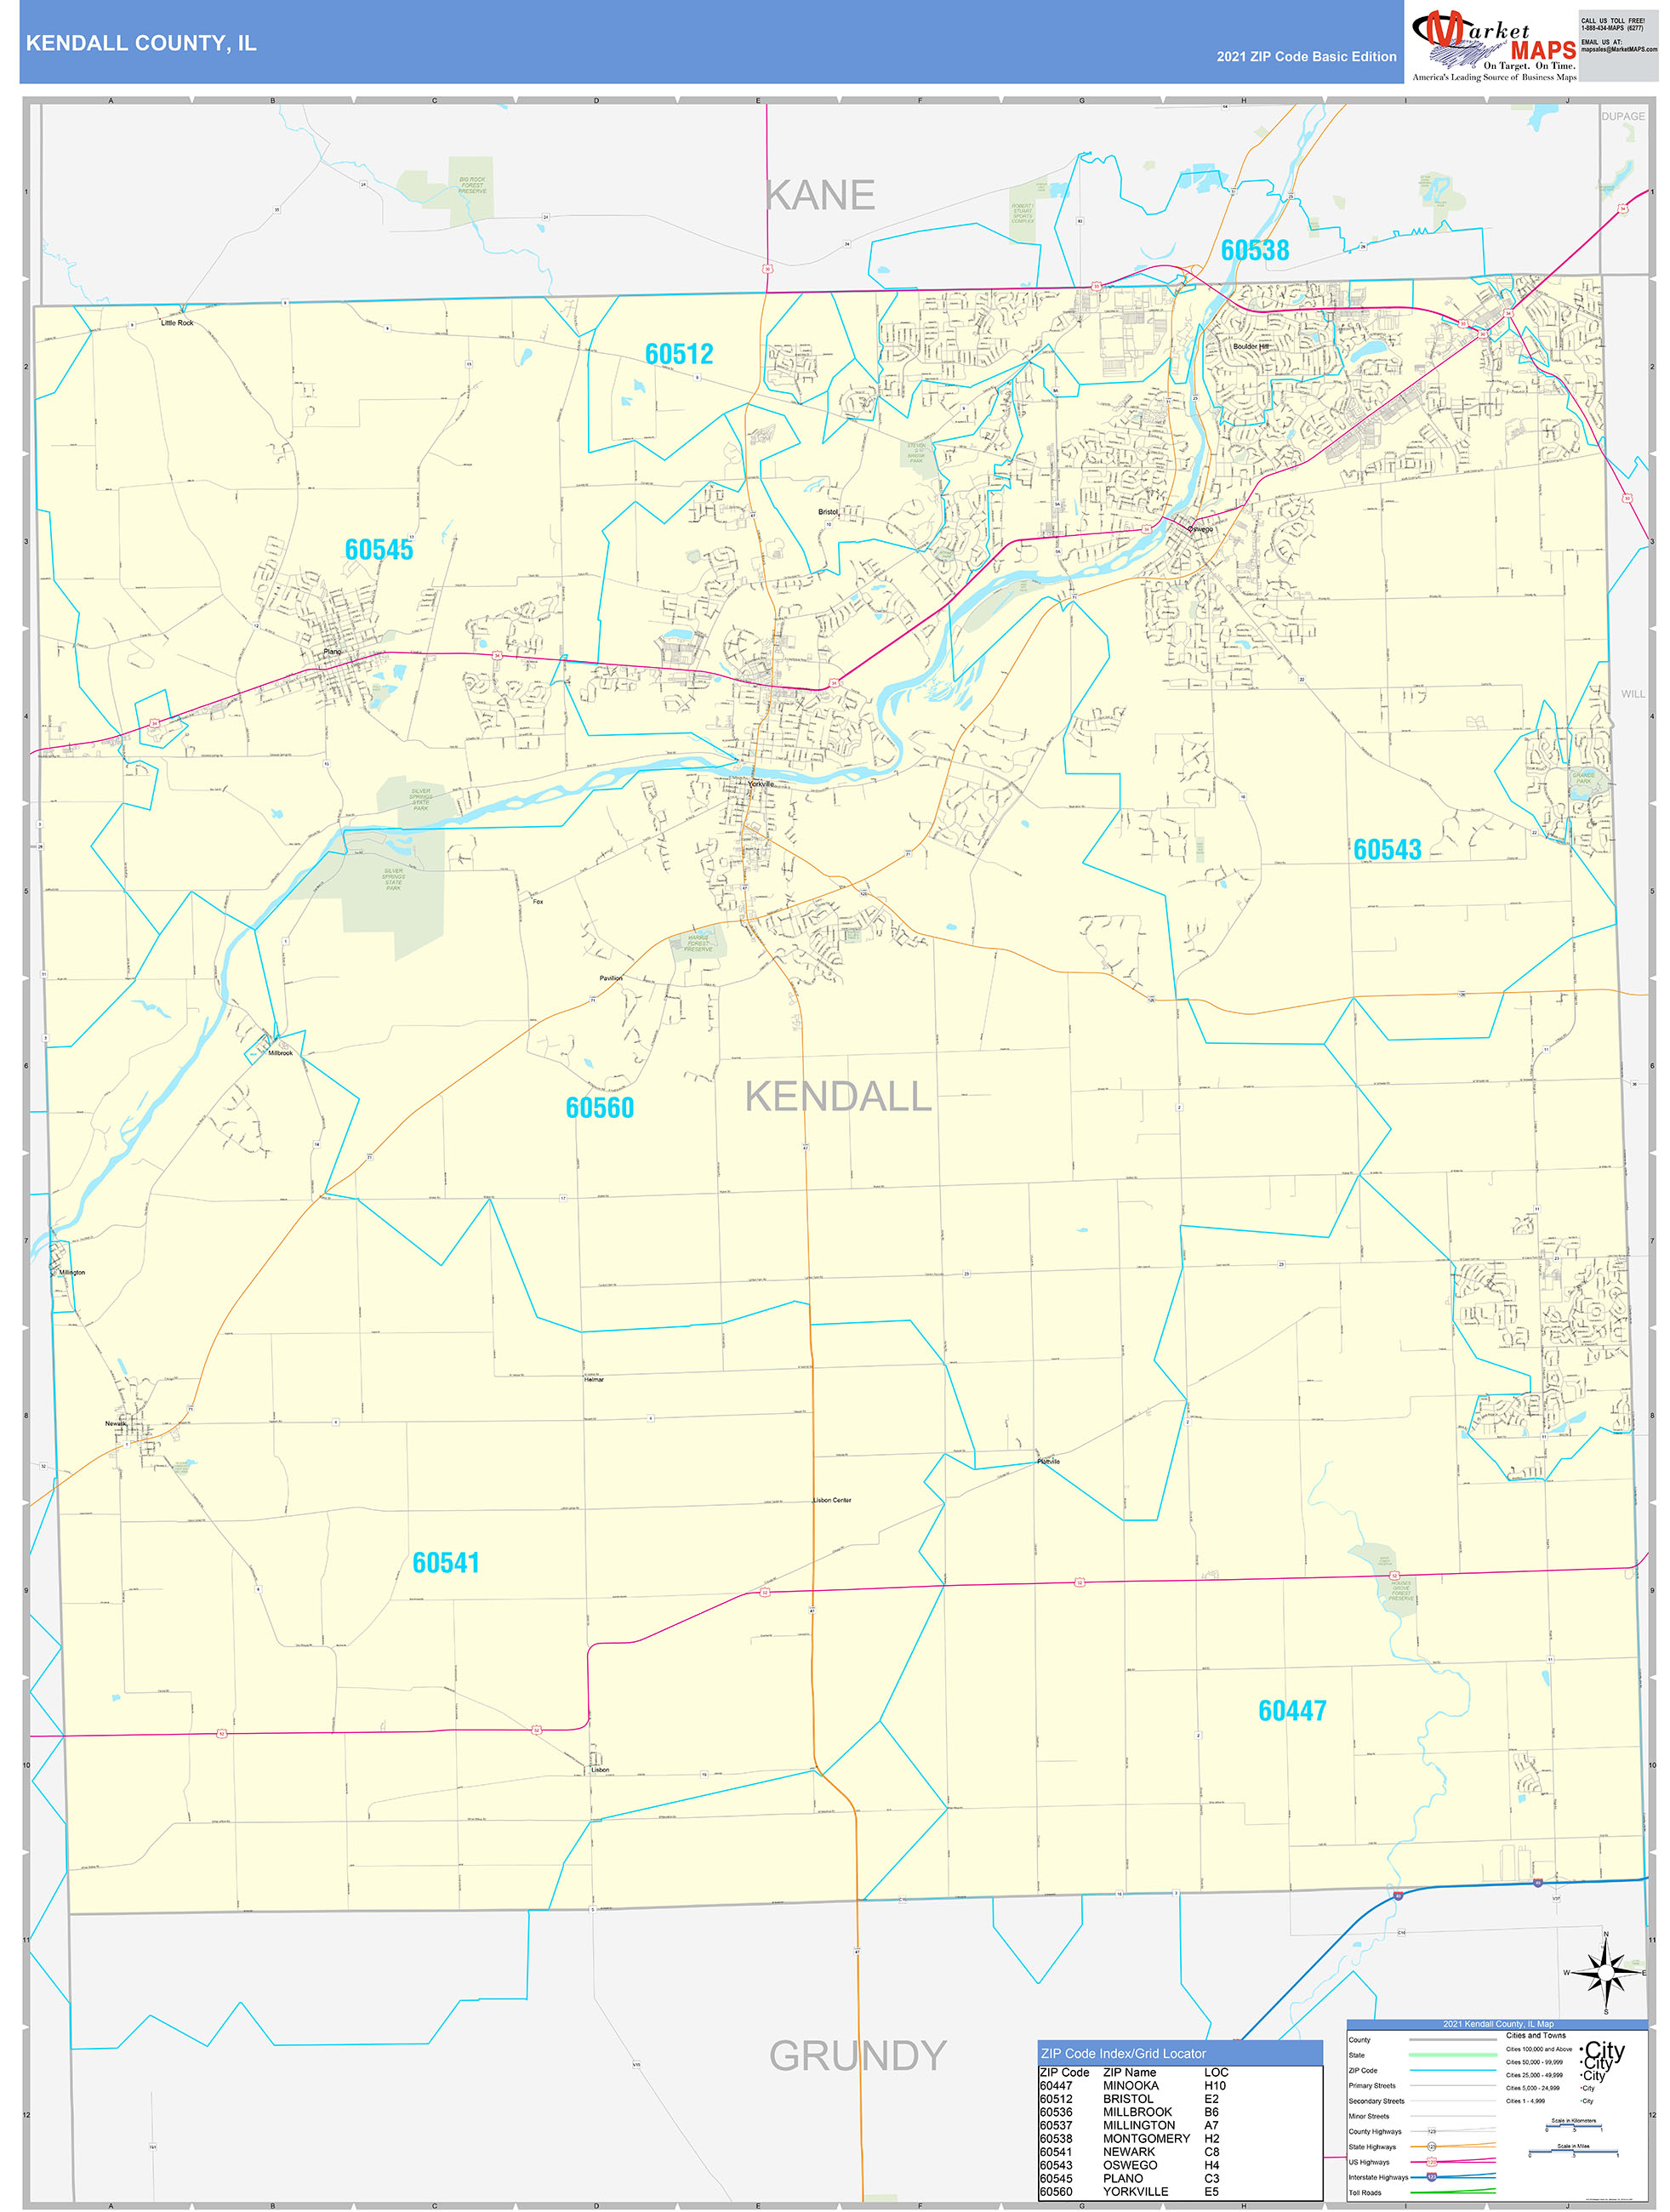 Kendall County IL Zip Code Wall Map Basic Style by MarketMAPS MapSales